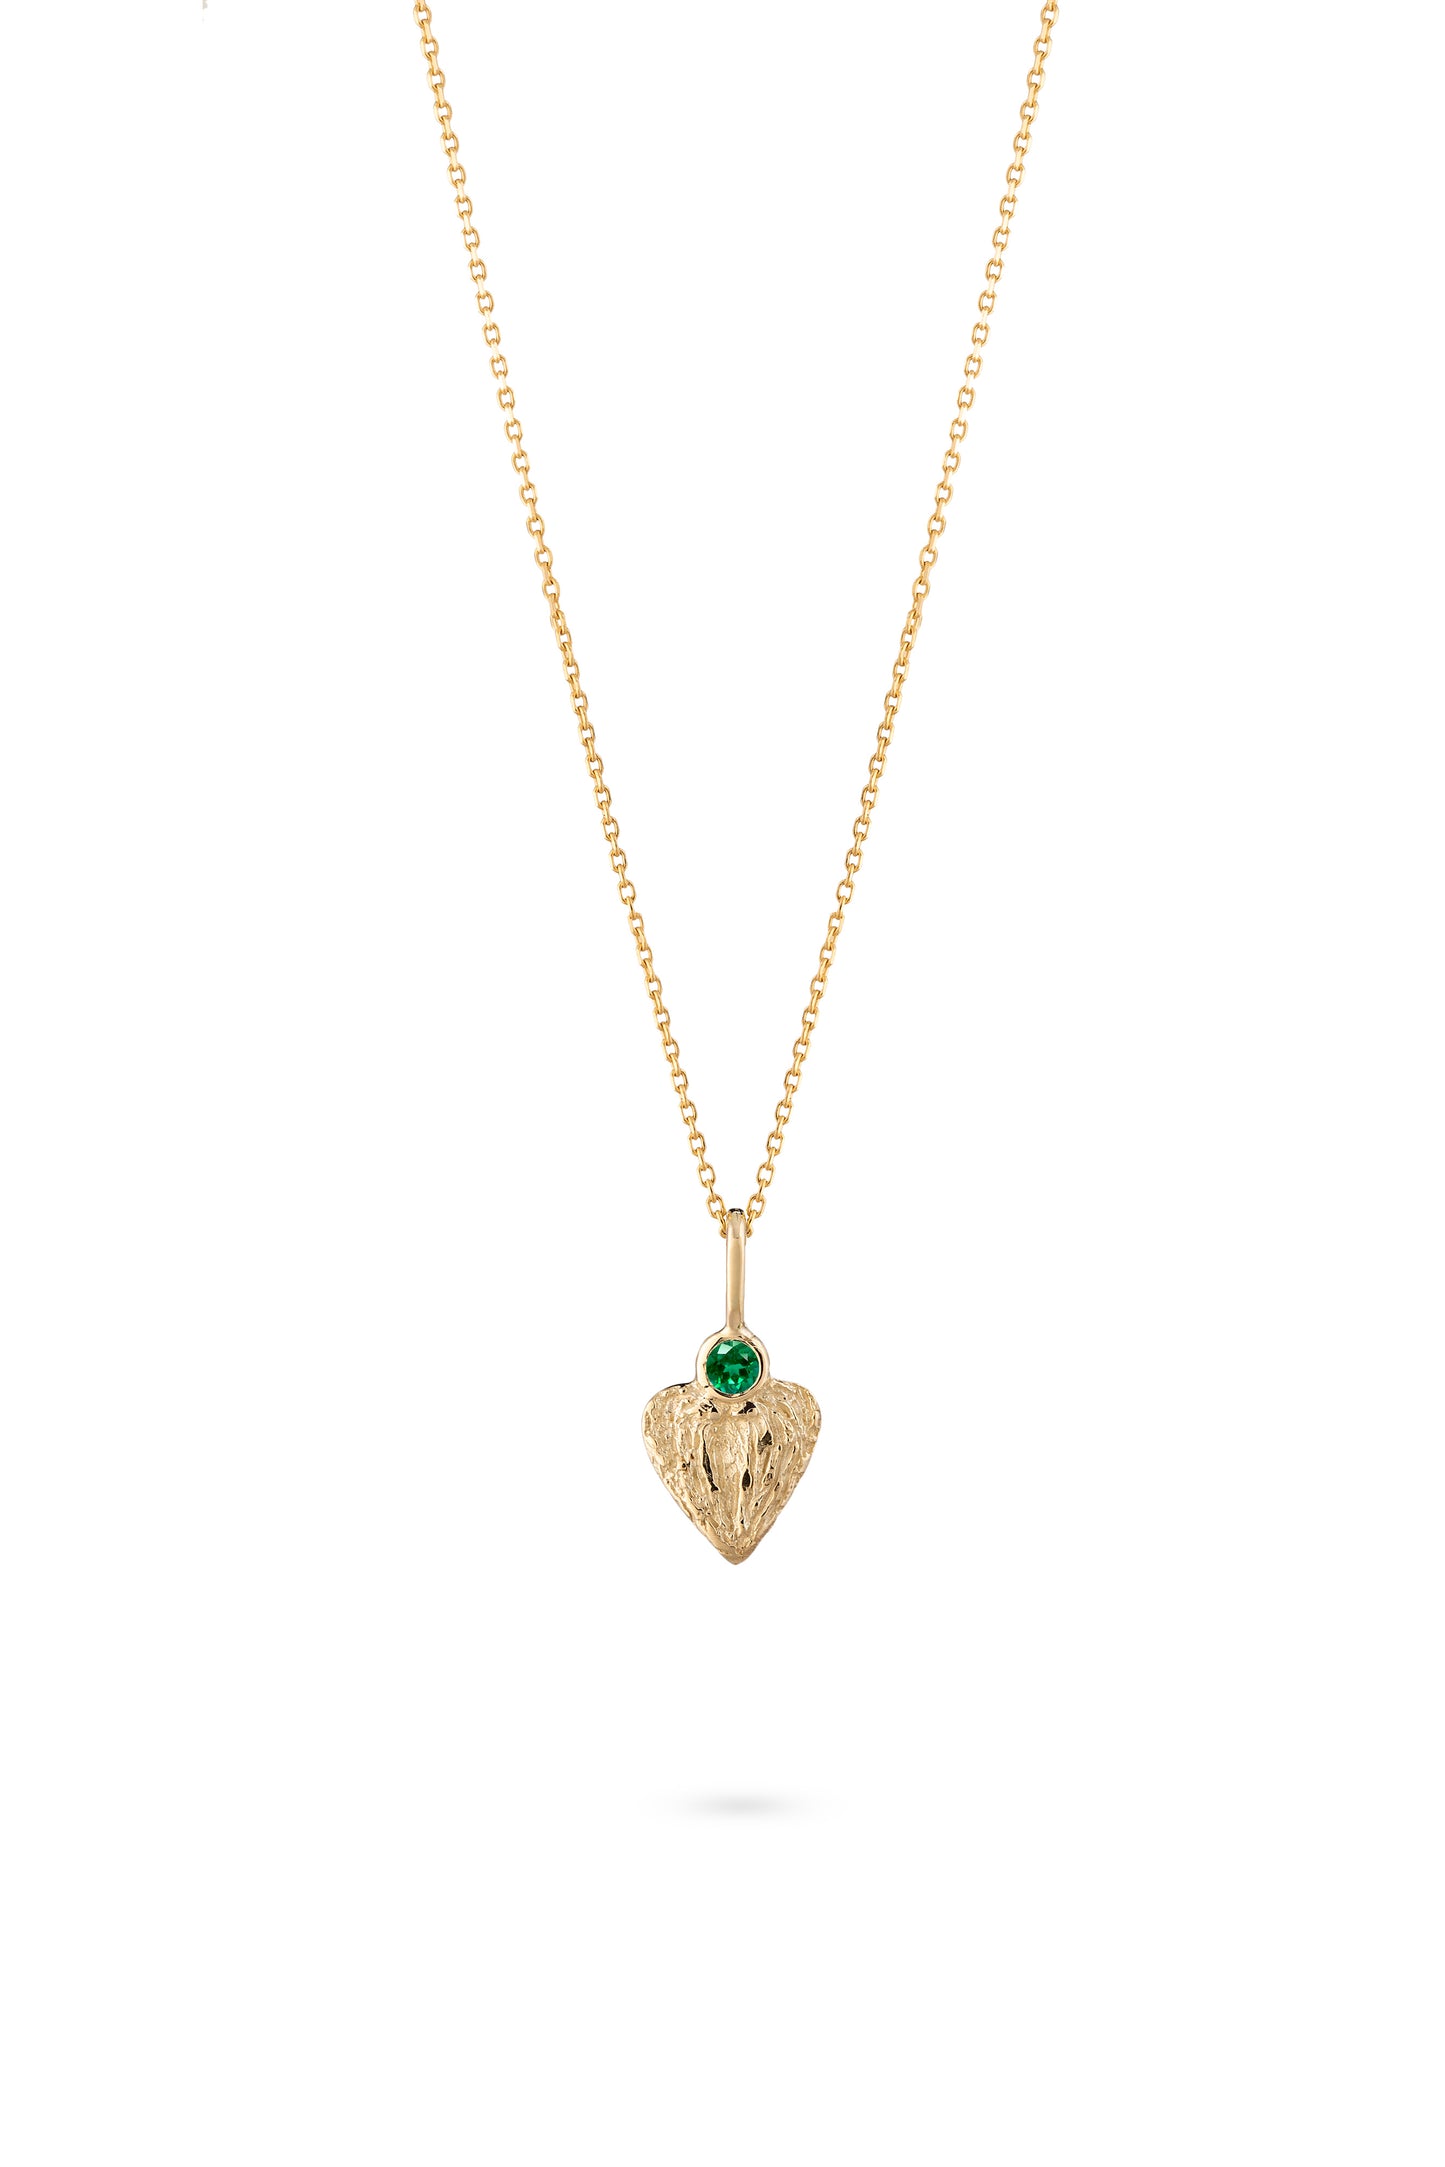 Heart Necklace - Angel's Wings with Emerald / M